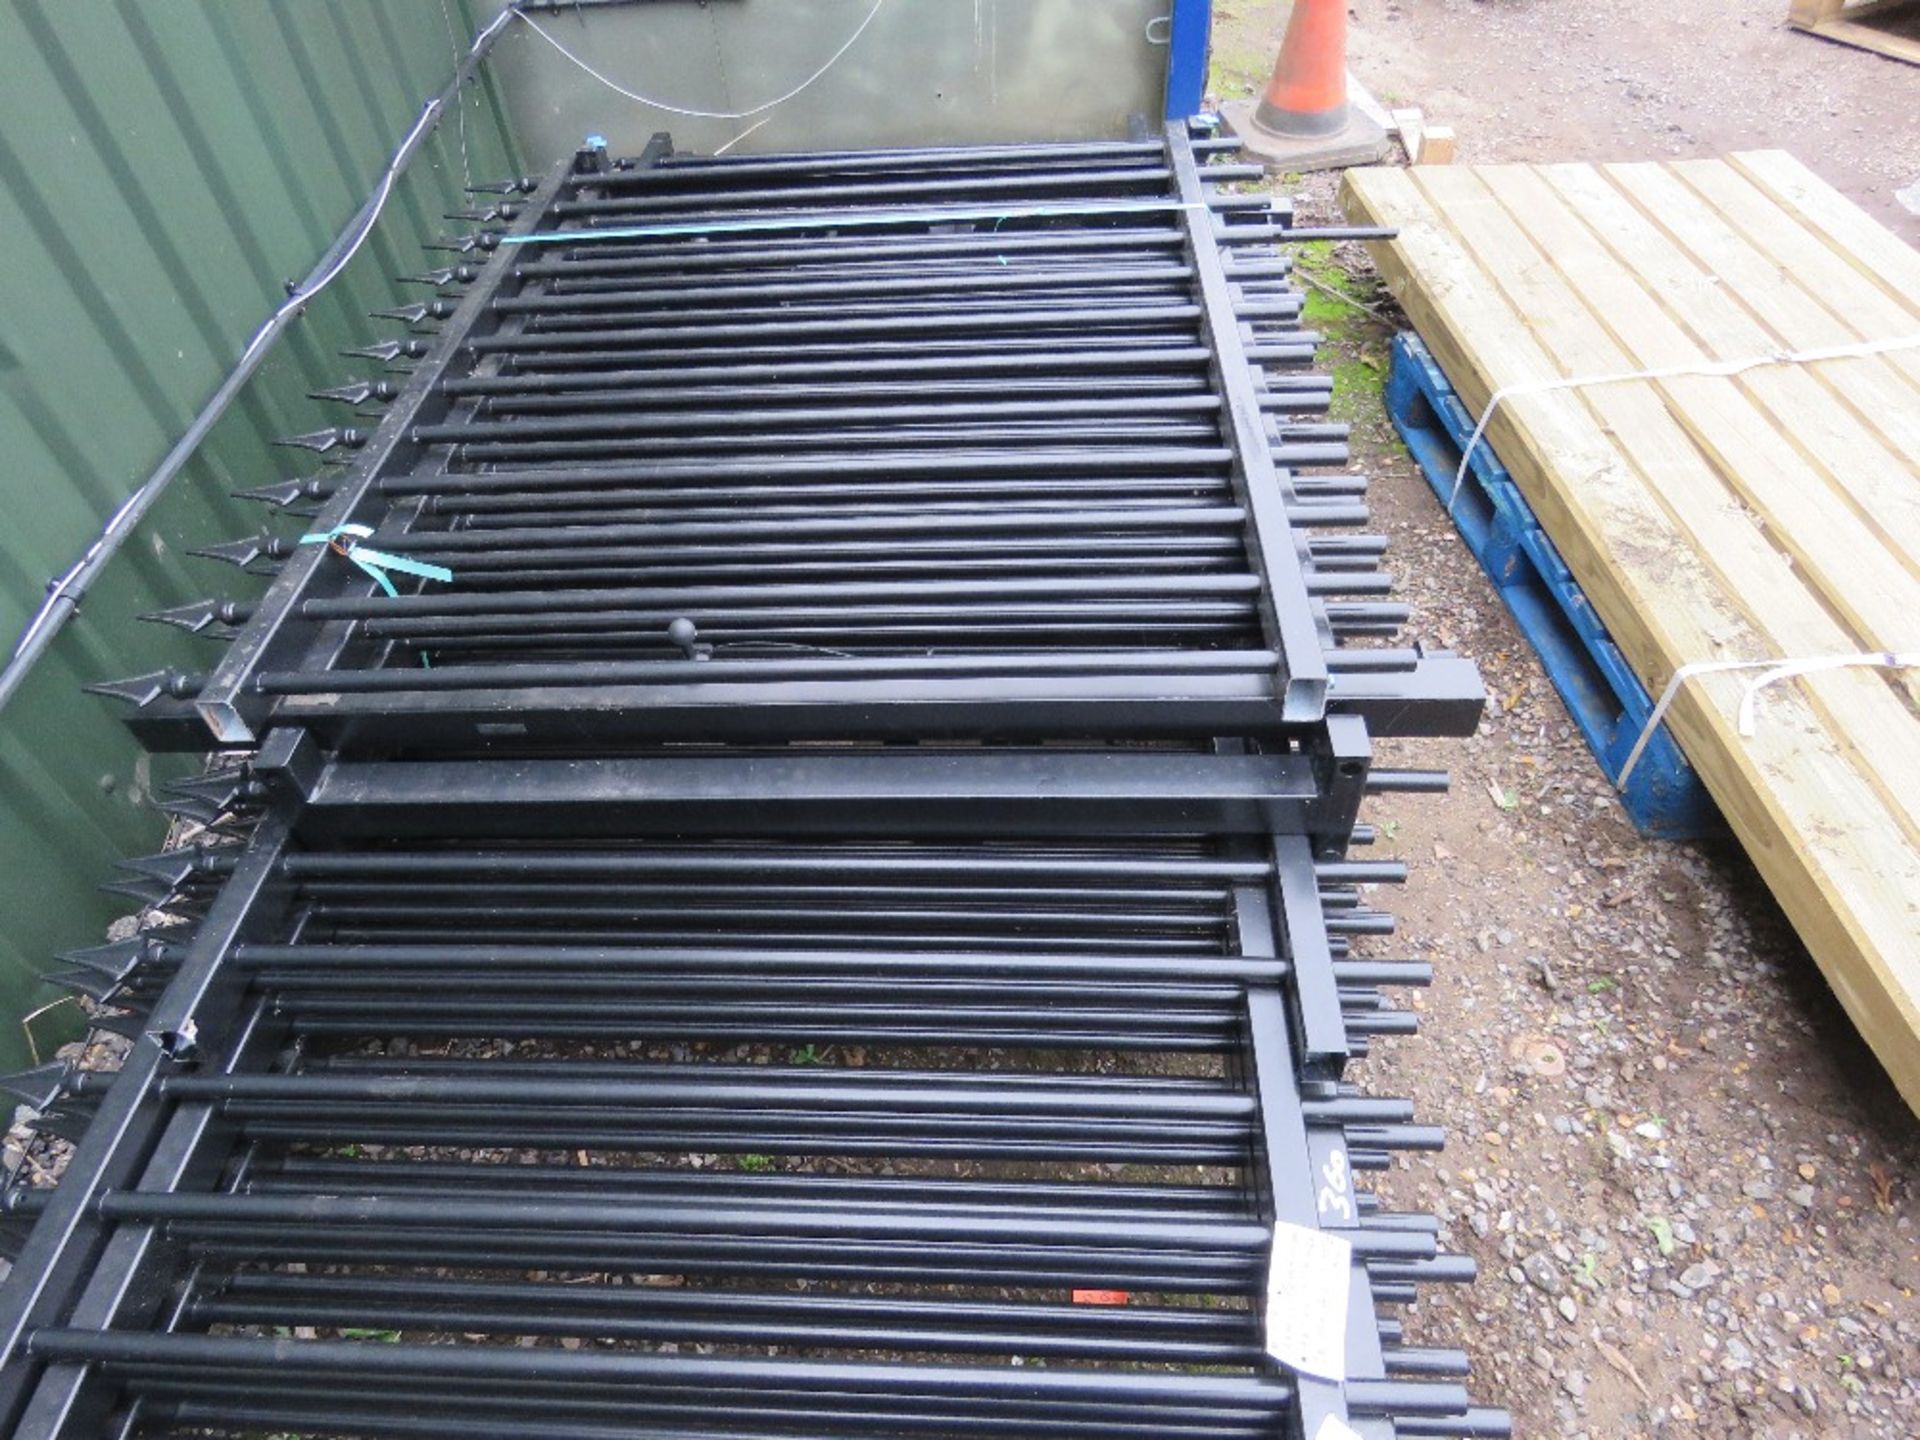 STACK OF BLACK STEEL ORNAMENTAL FENCING, 1.5M HEIGHT, UNUSED. 18M LENGTH APPROX WITH 2 X GATES@1.5M - Image 3 of 4